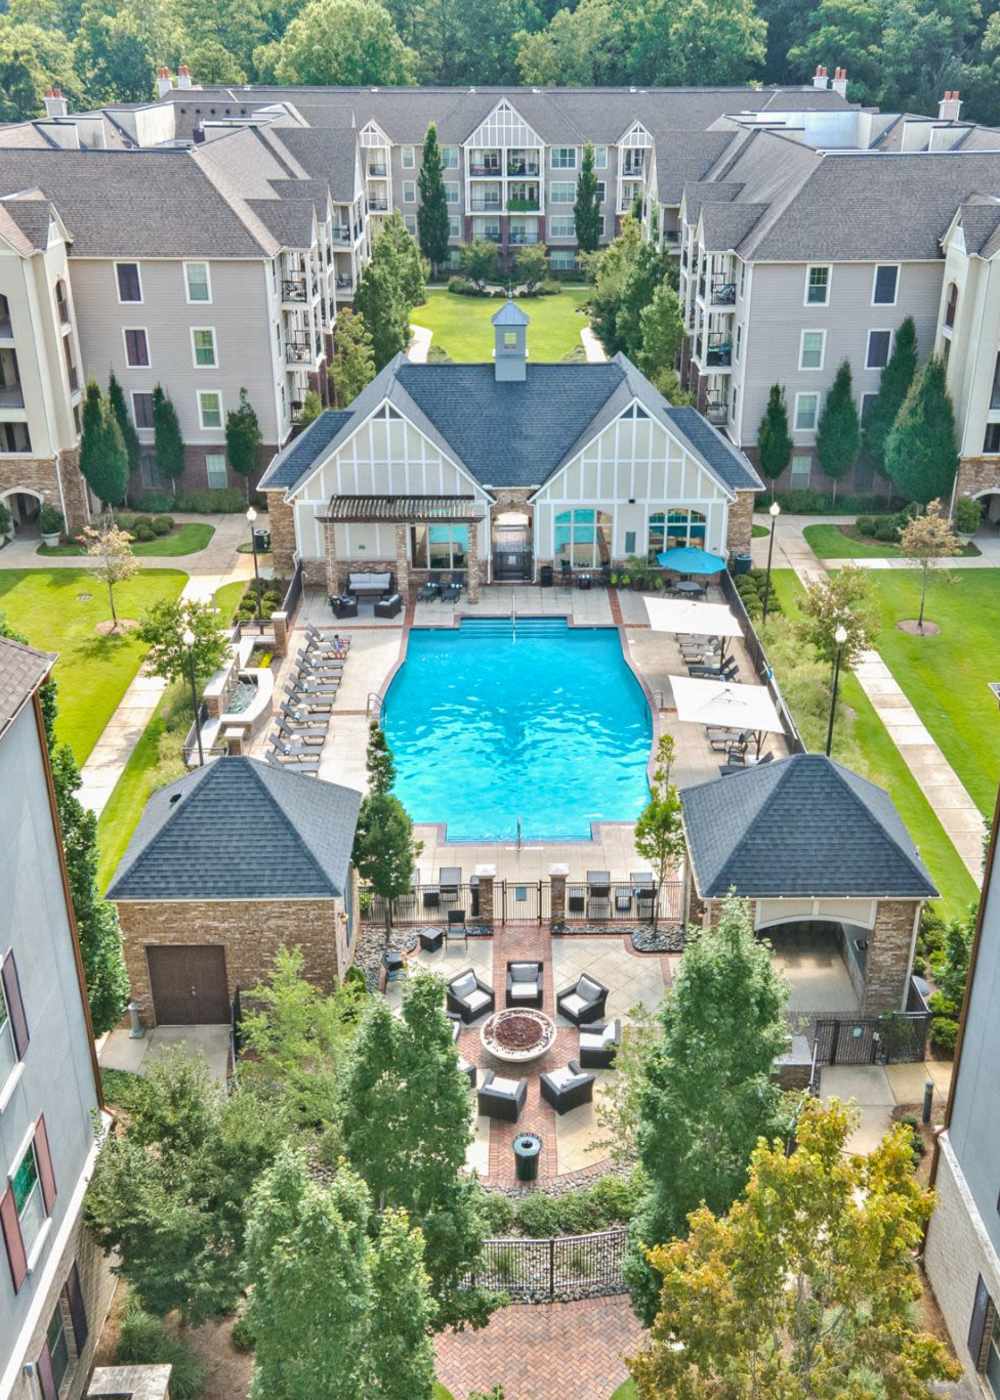 Overhead community view at Lane Parke Apartments in Mountain Brook, Alabama